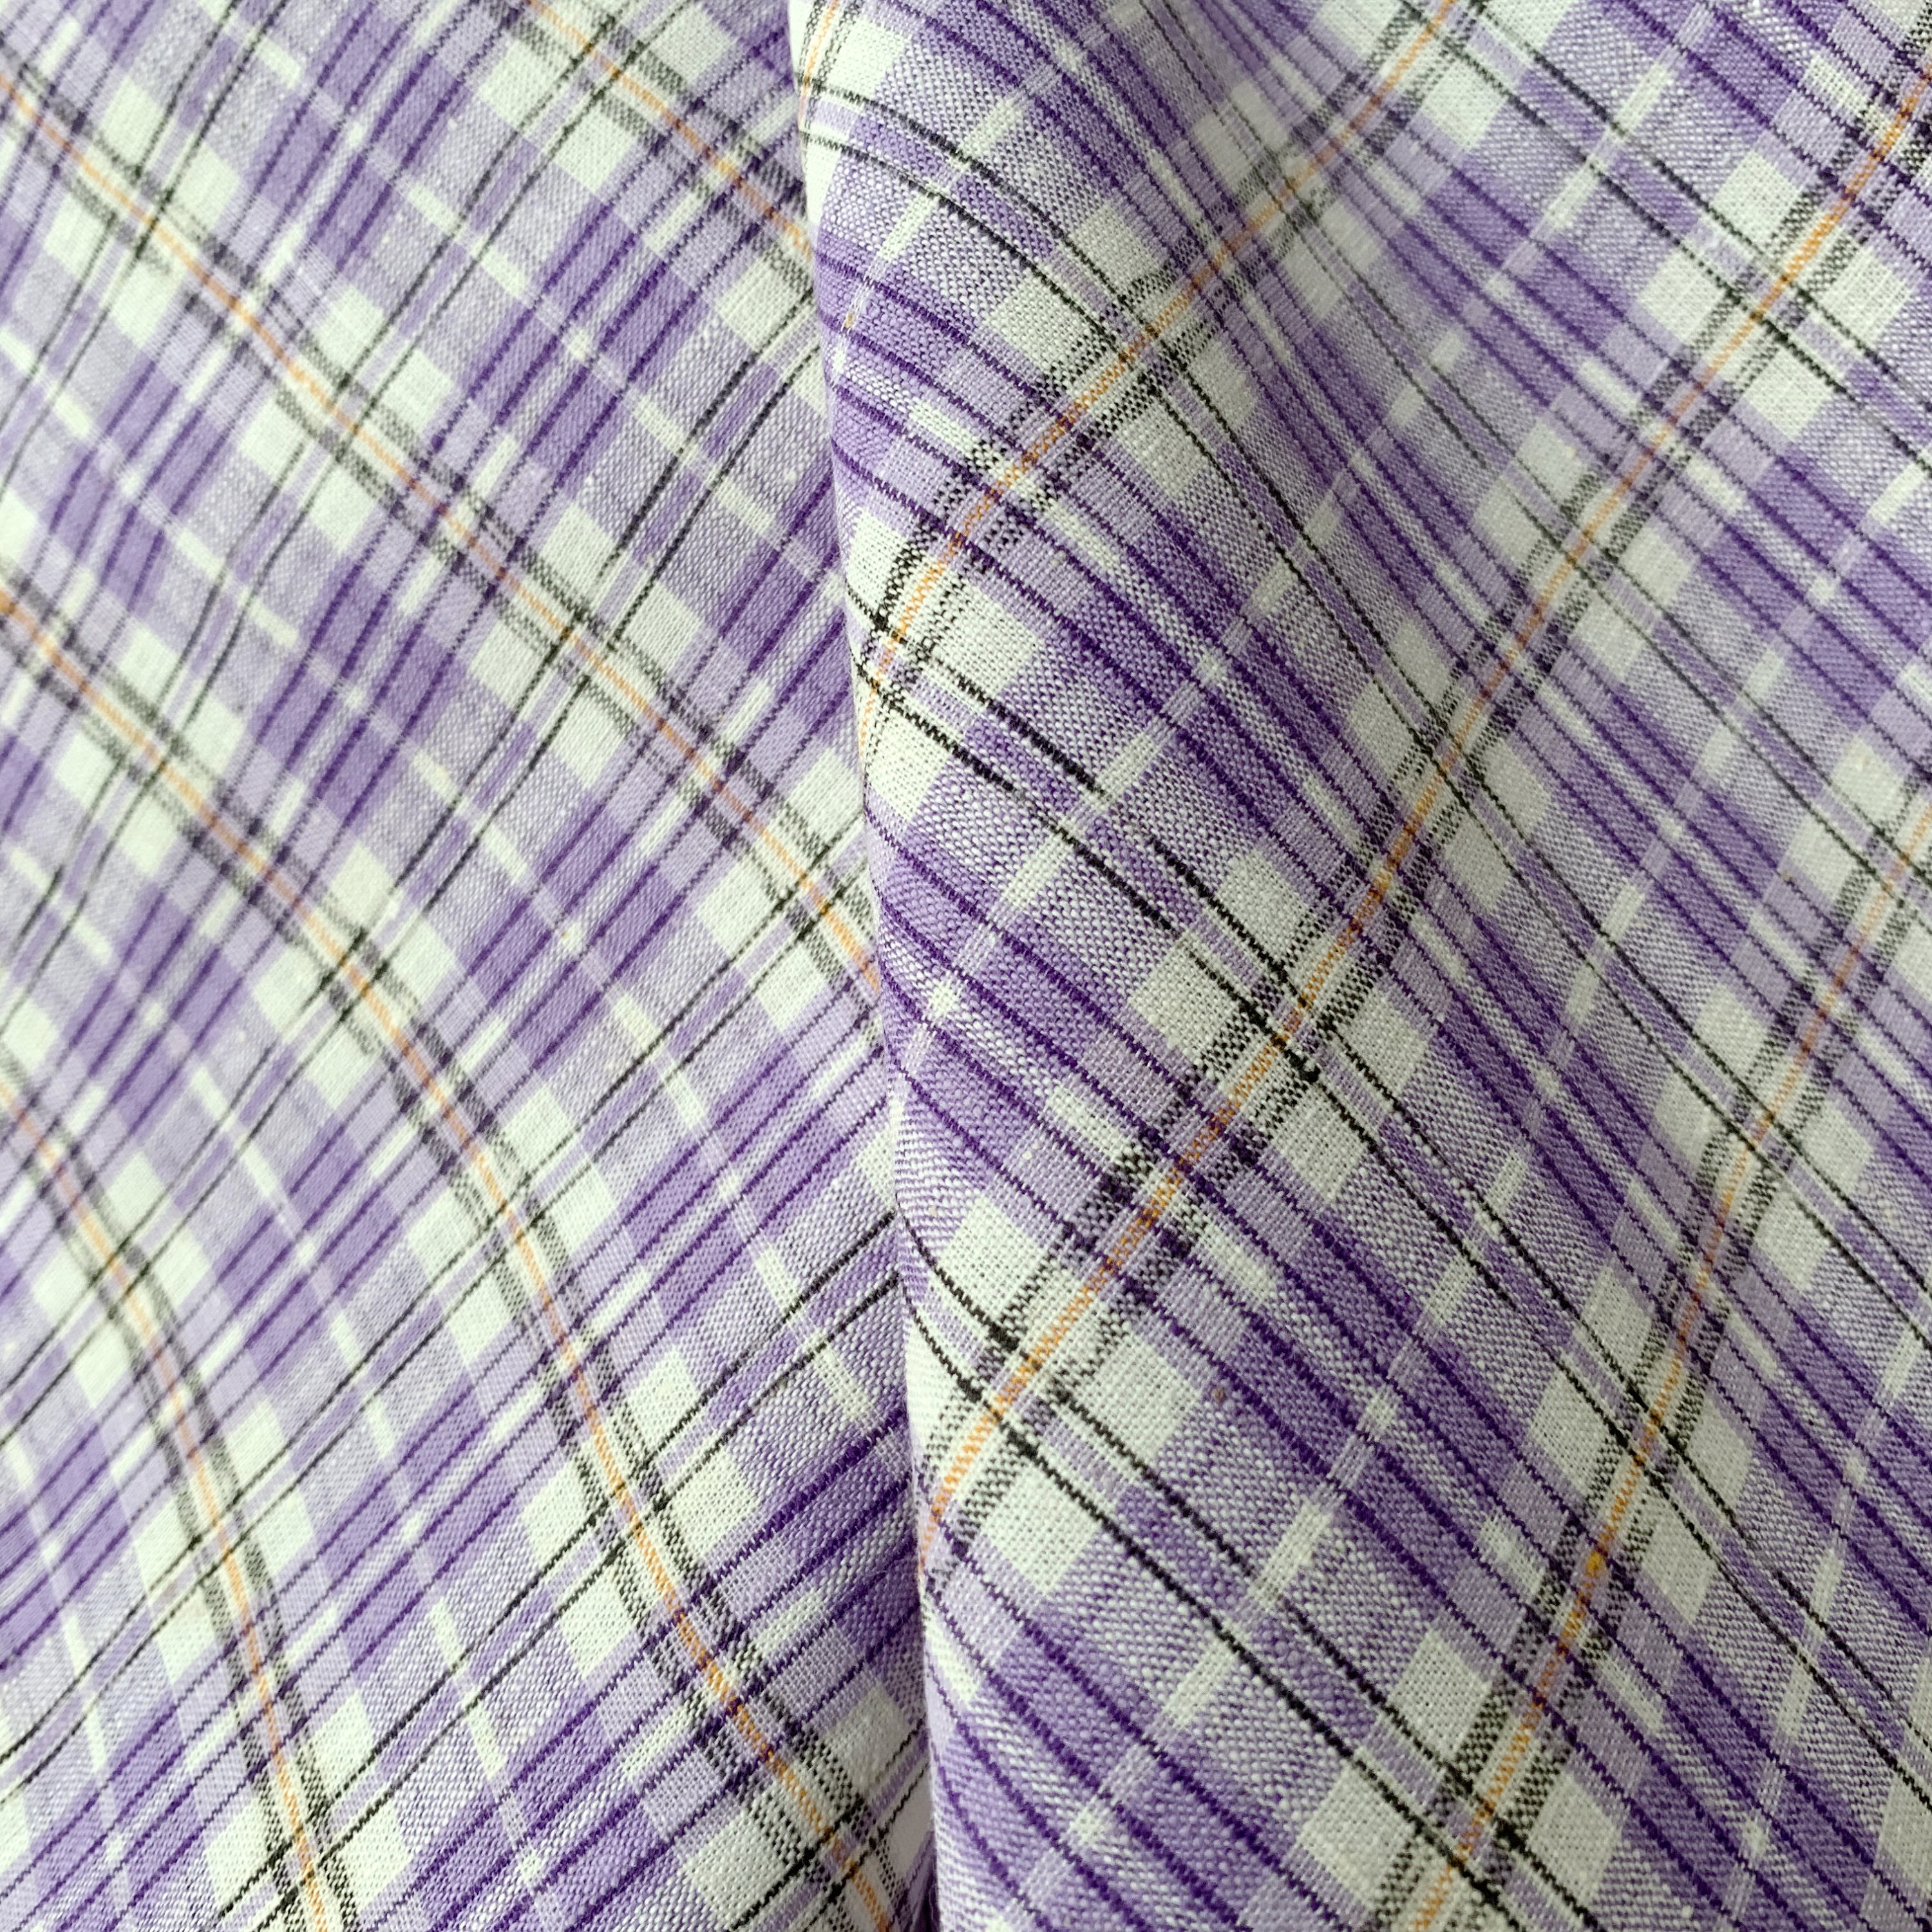 Vintage French purple plaid fabric for light upholstery | Etsy